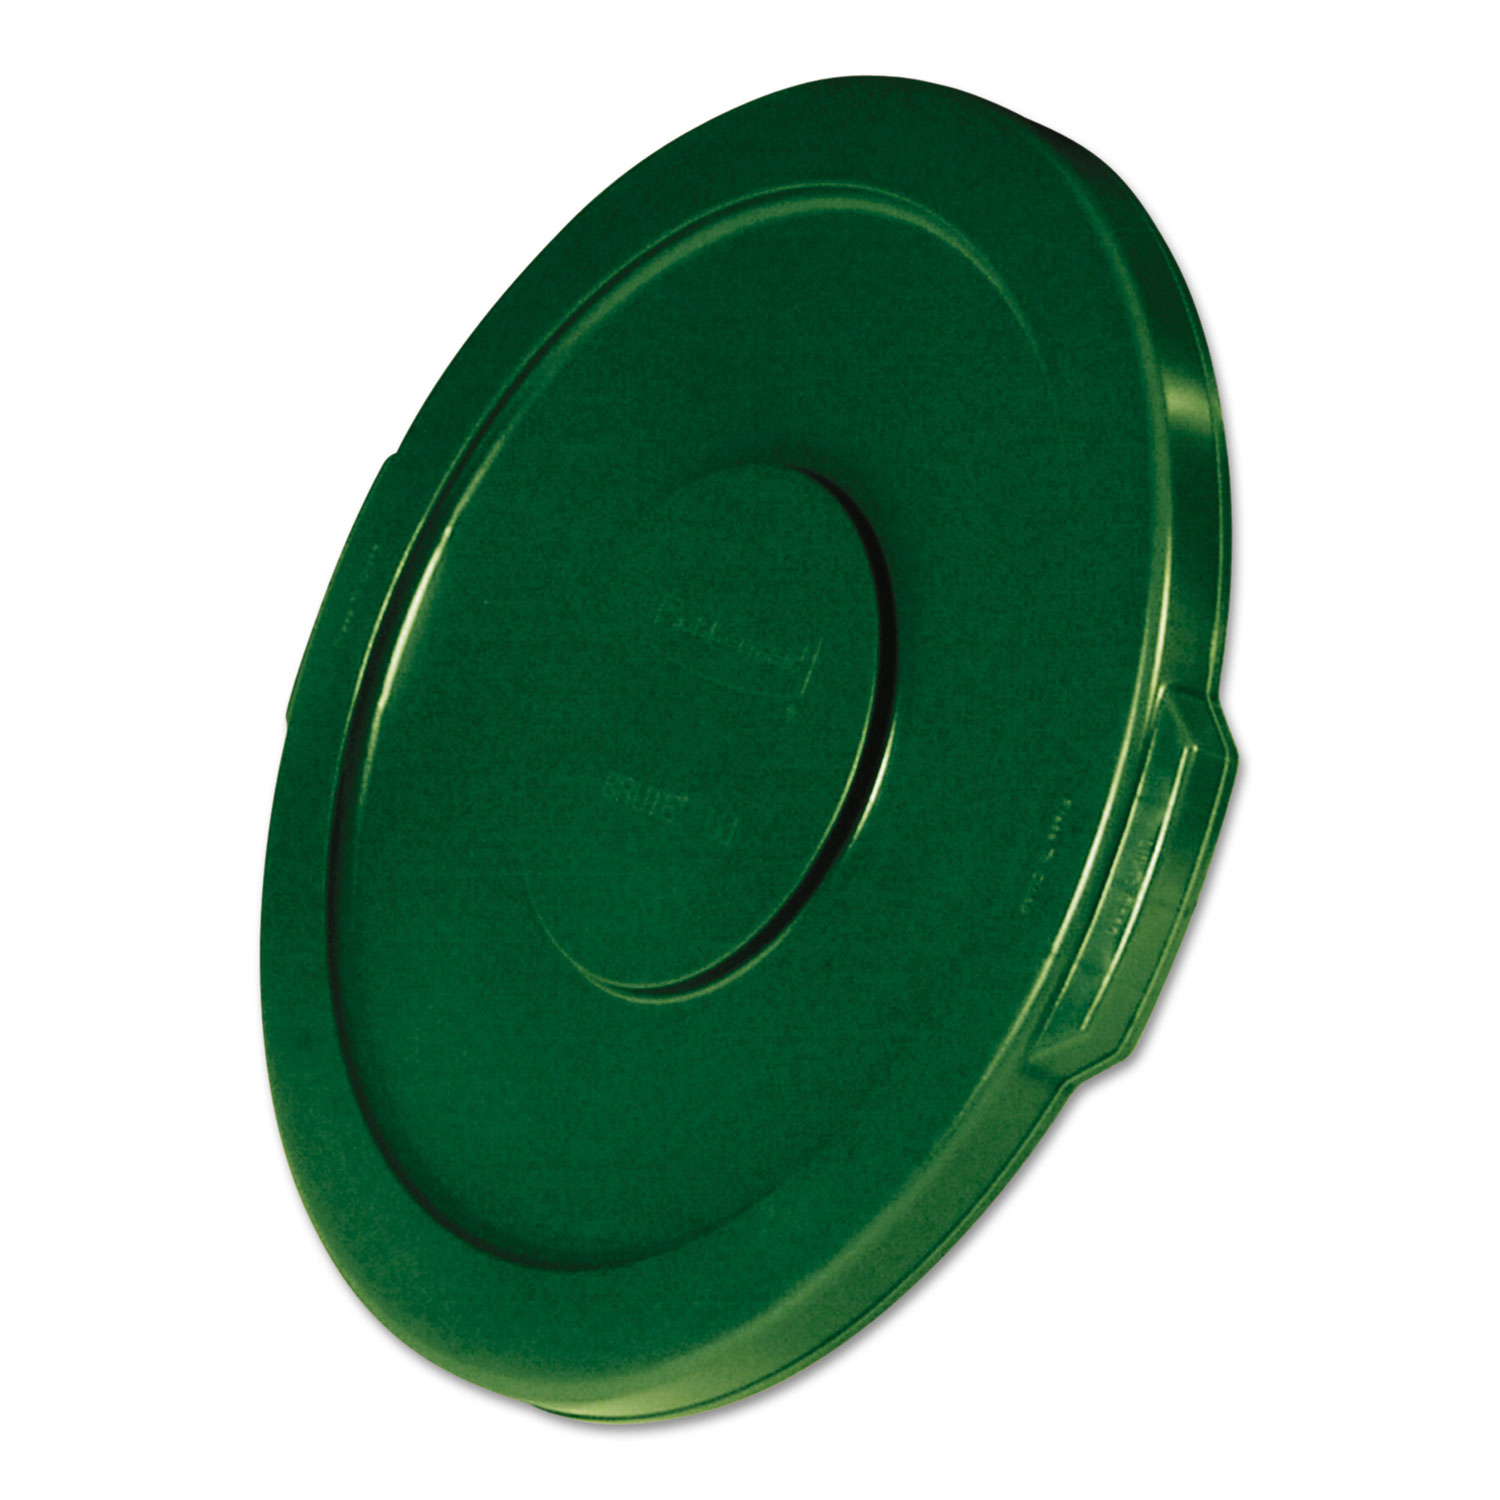 Flat Top Lid for 10-Gallon Round Brute Container, 16 dia., Dark Green, 6/Carton